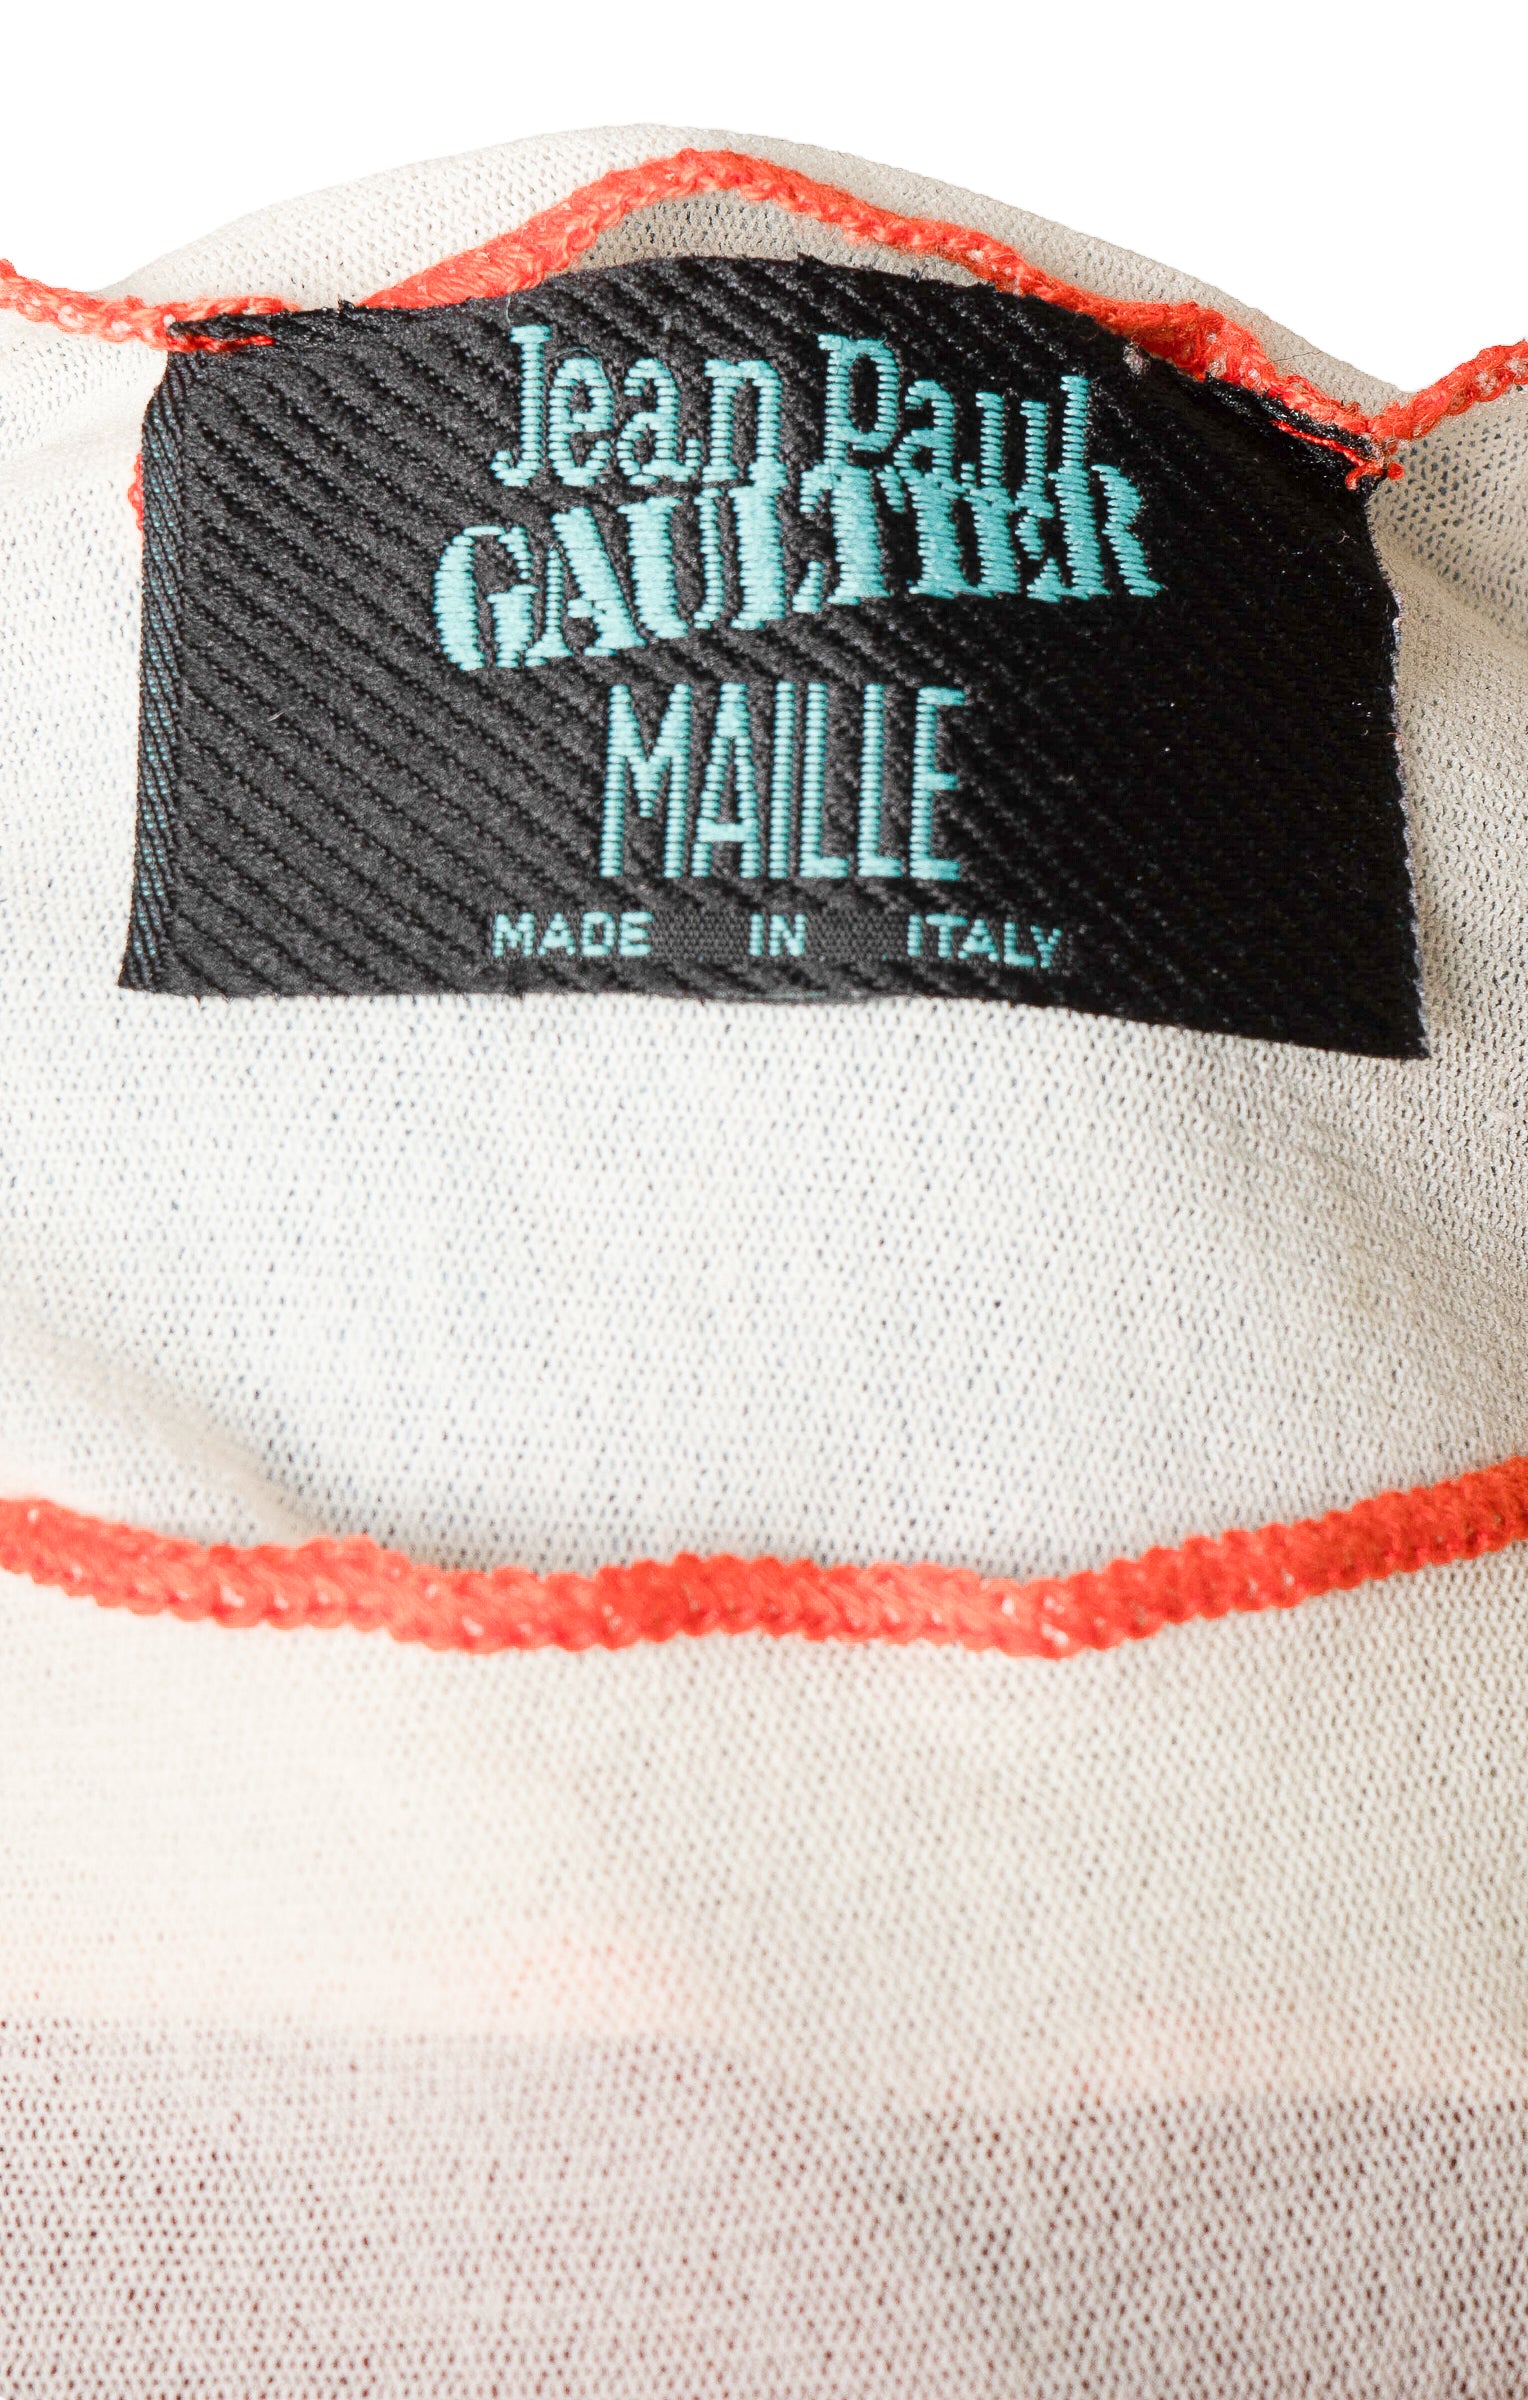 VINTAGE JEAN PAUL GAULTIER MAILLE (RARE) Top Size: No size tags, fits like M